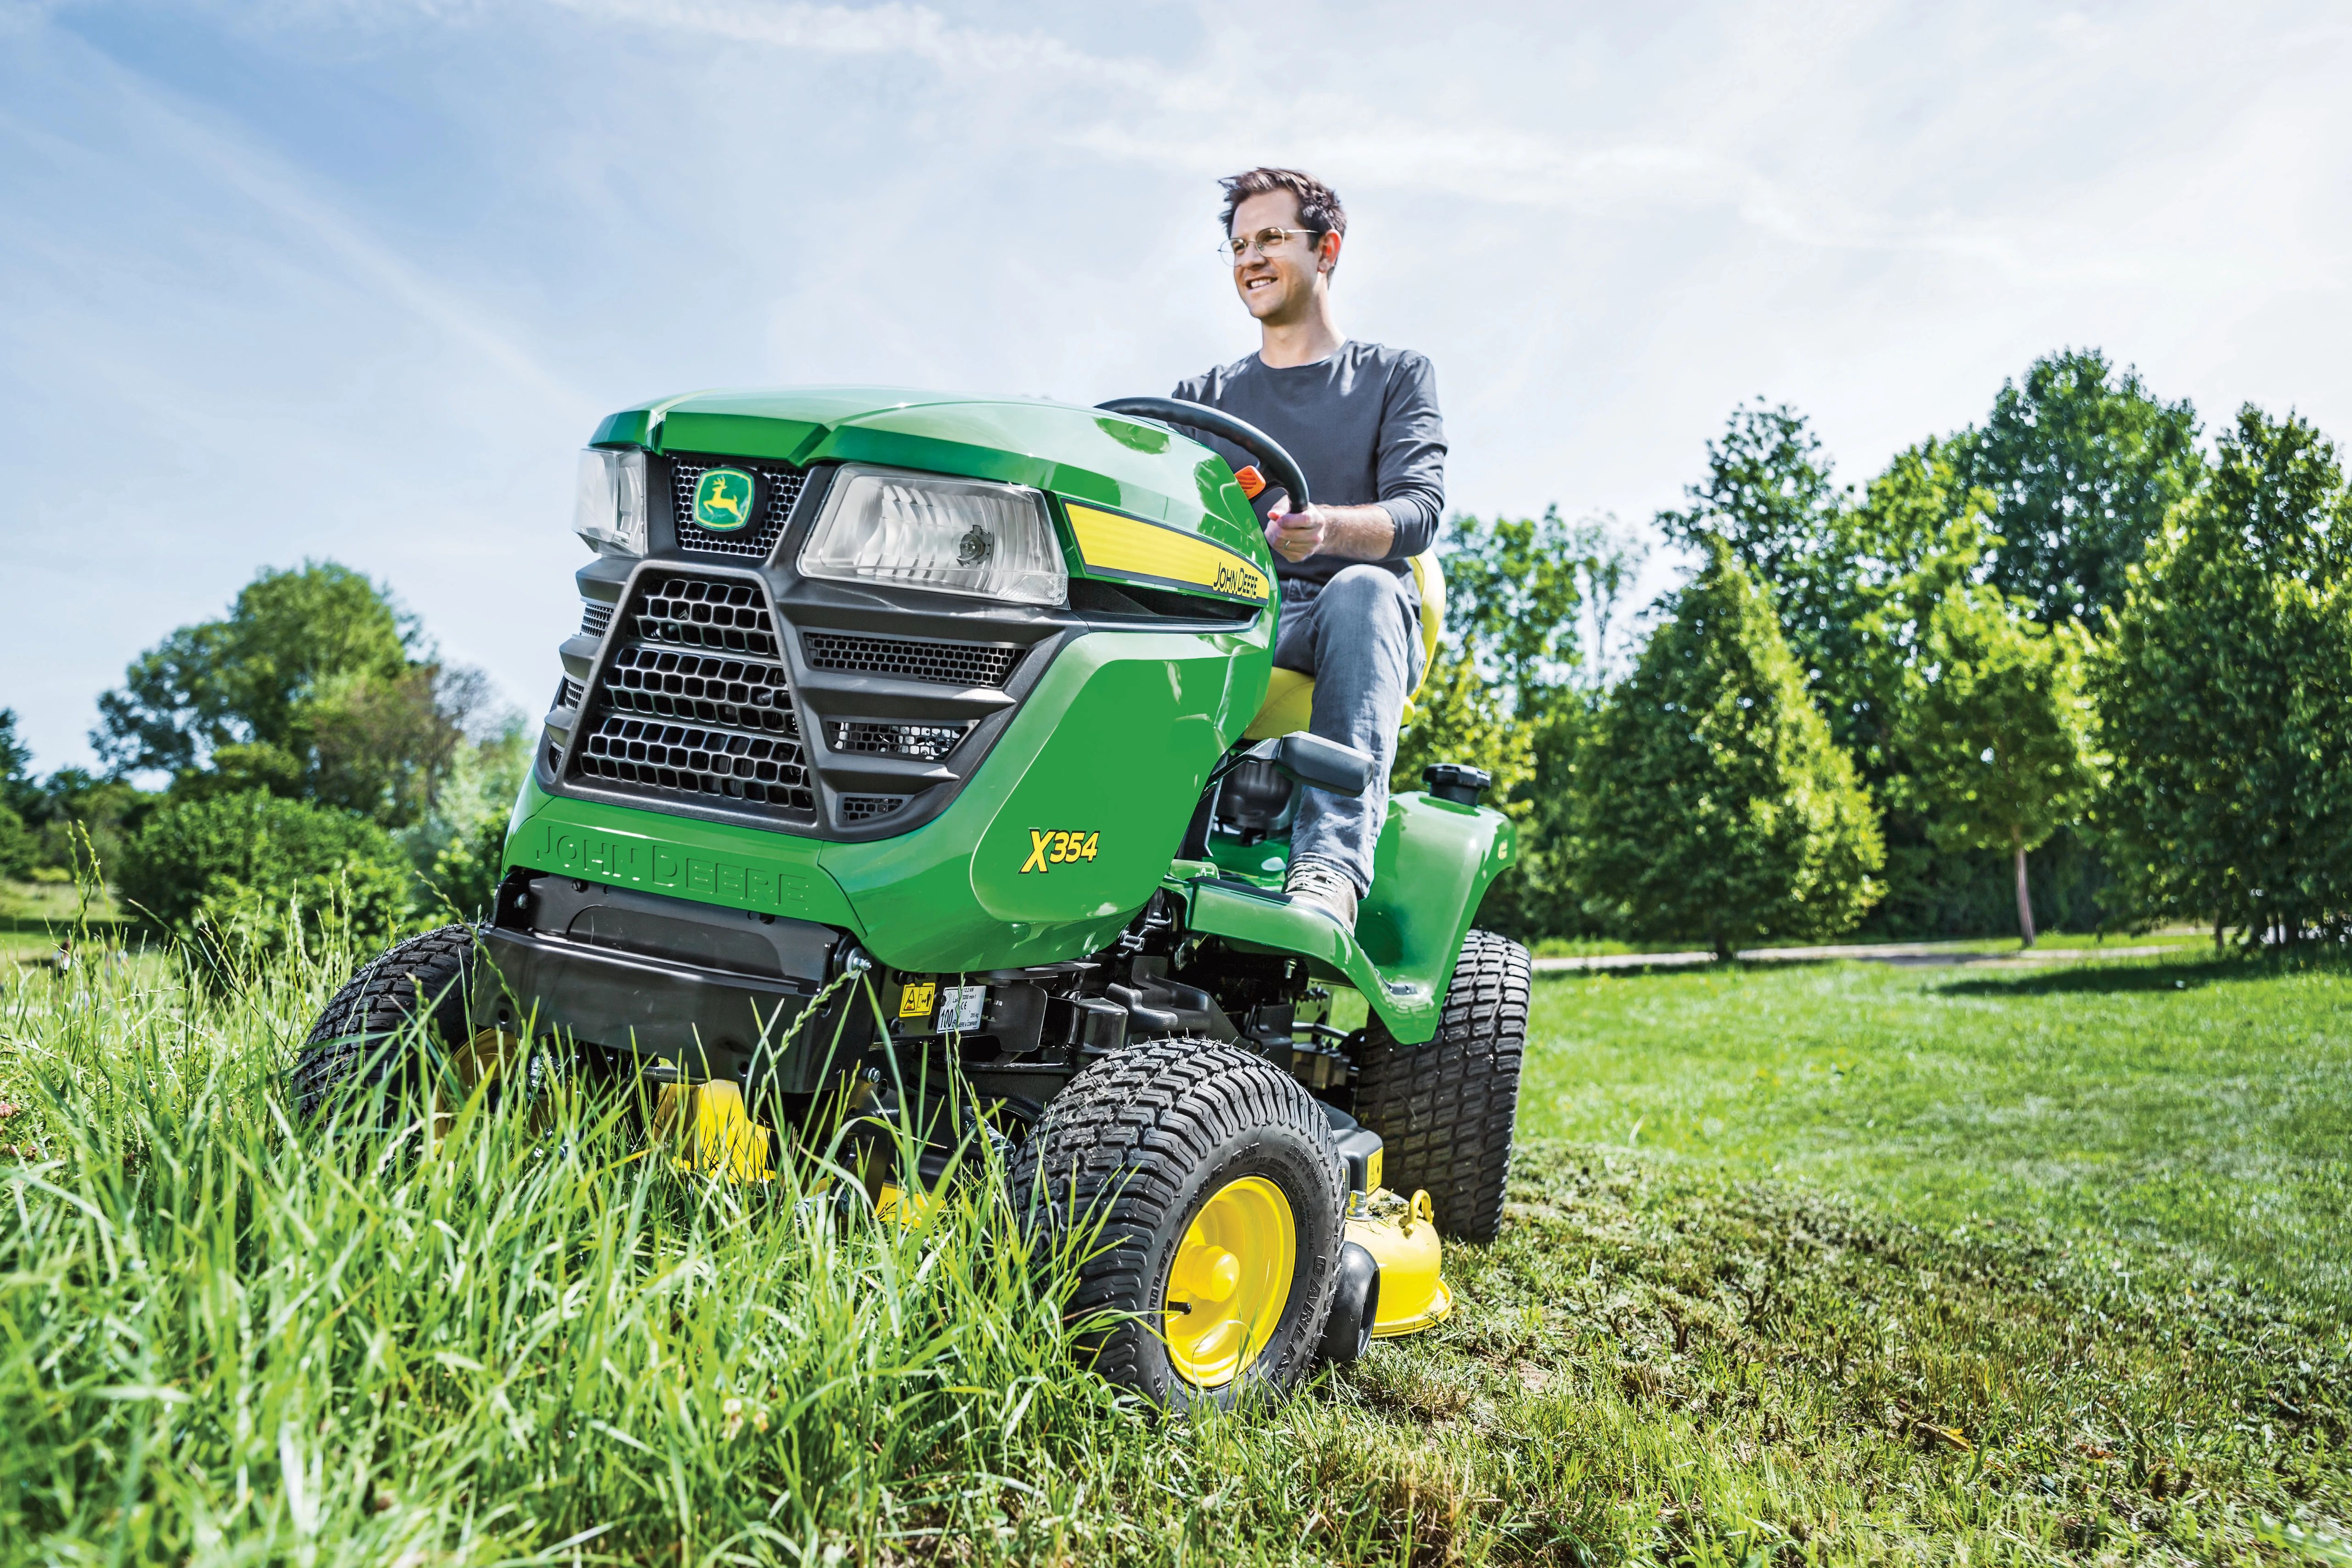 John Deere Lawn Tractors - Ready for anything!